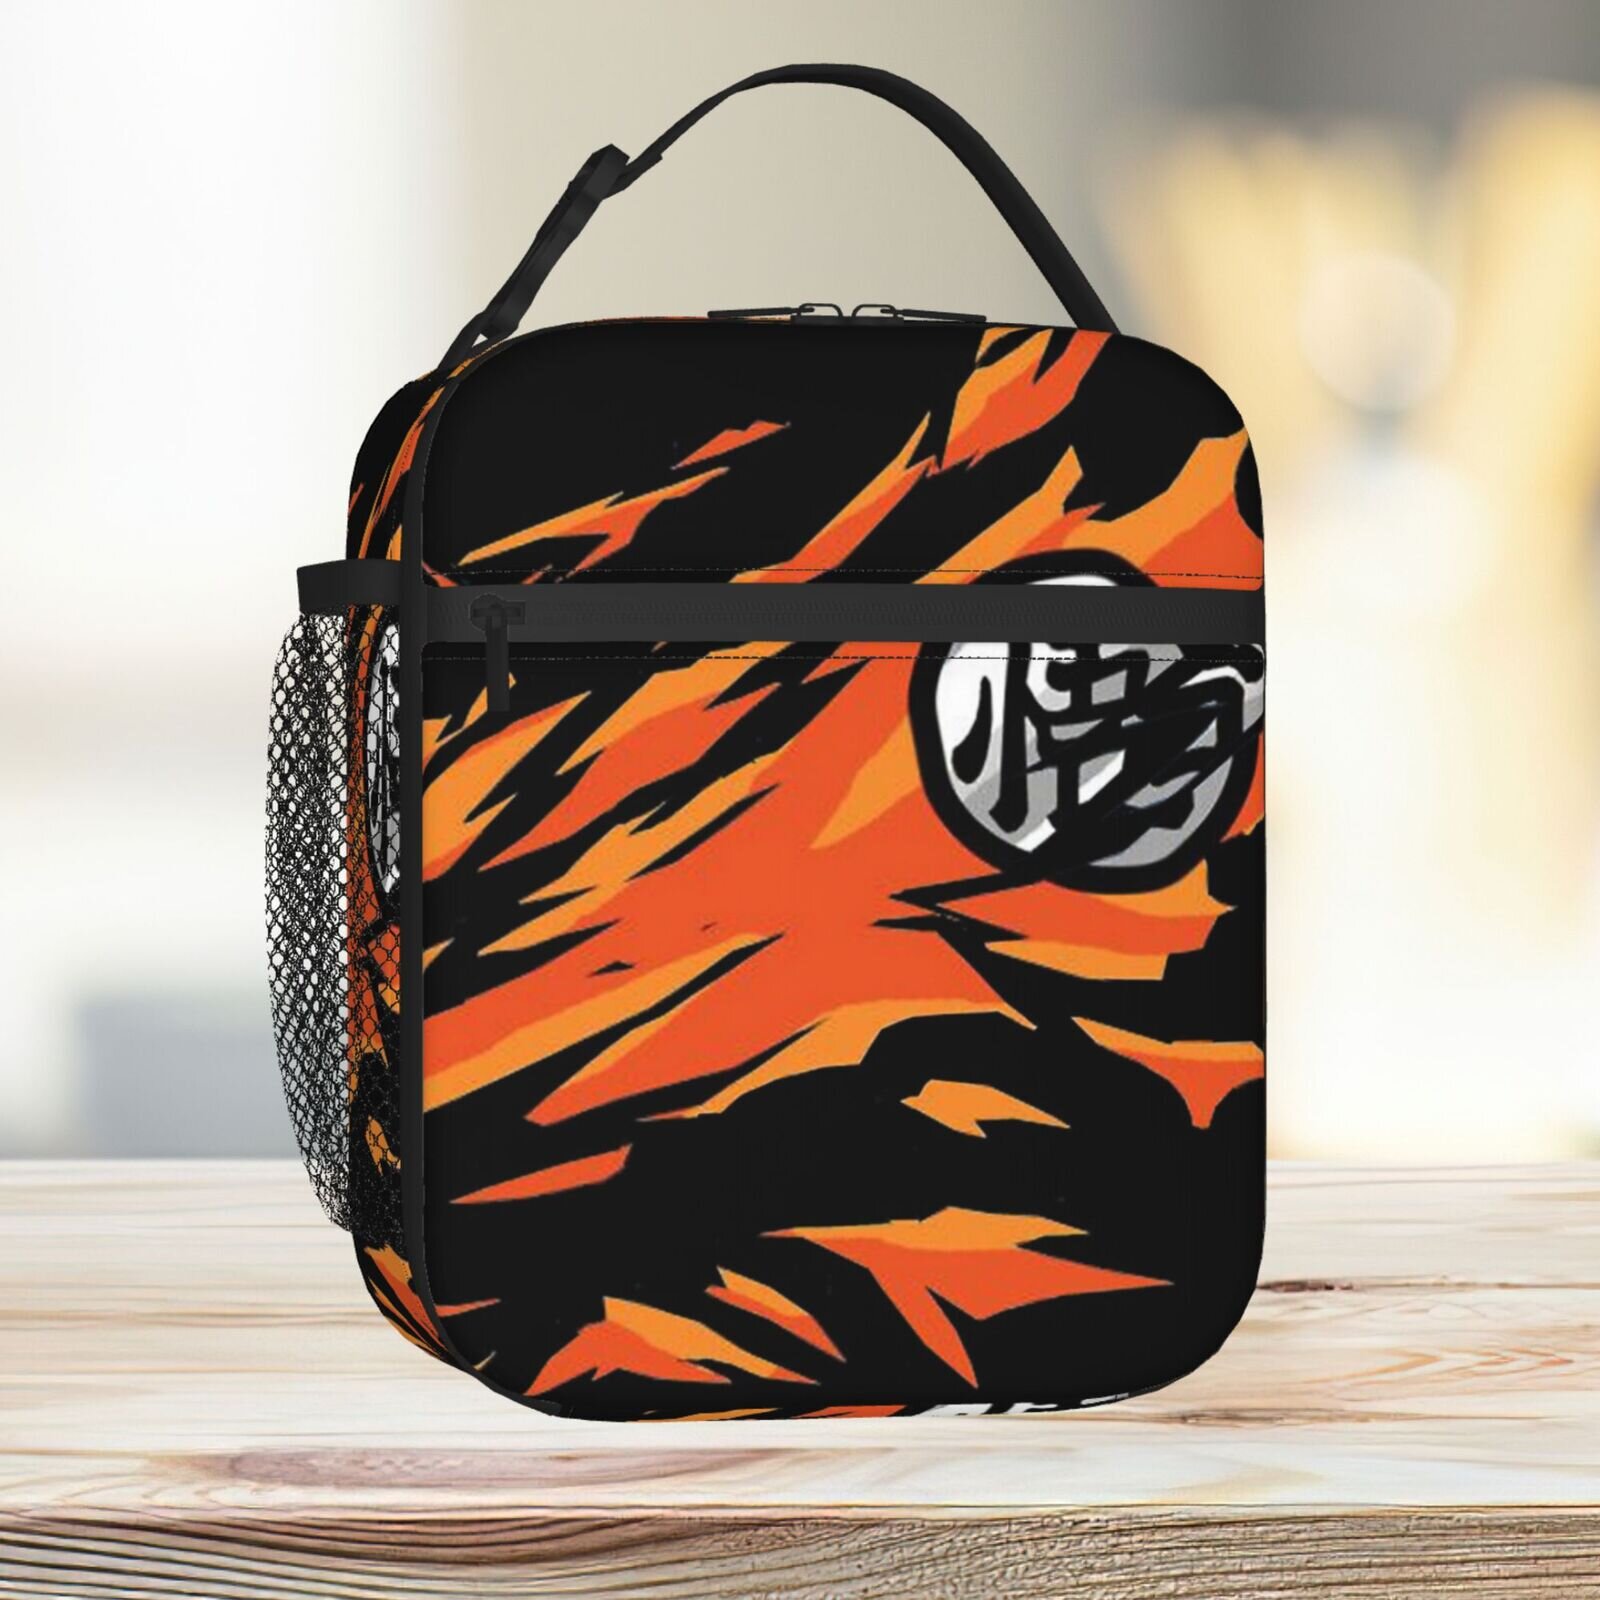 Lunch Bag Son Goku-dragon Ball Z Tote Insulated Cooler Kids School Travel